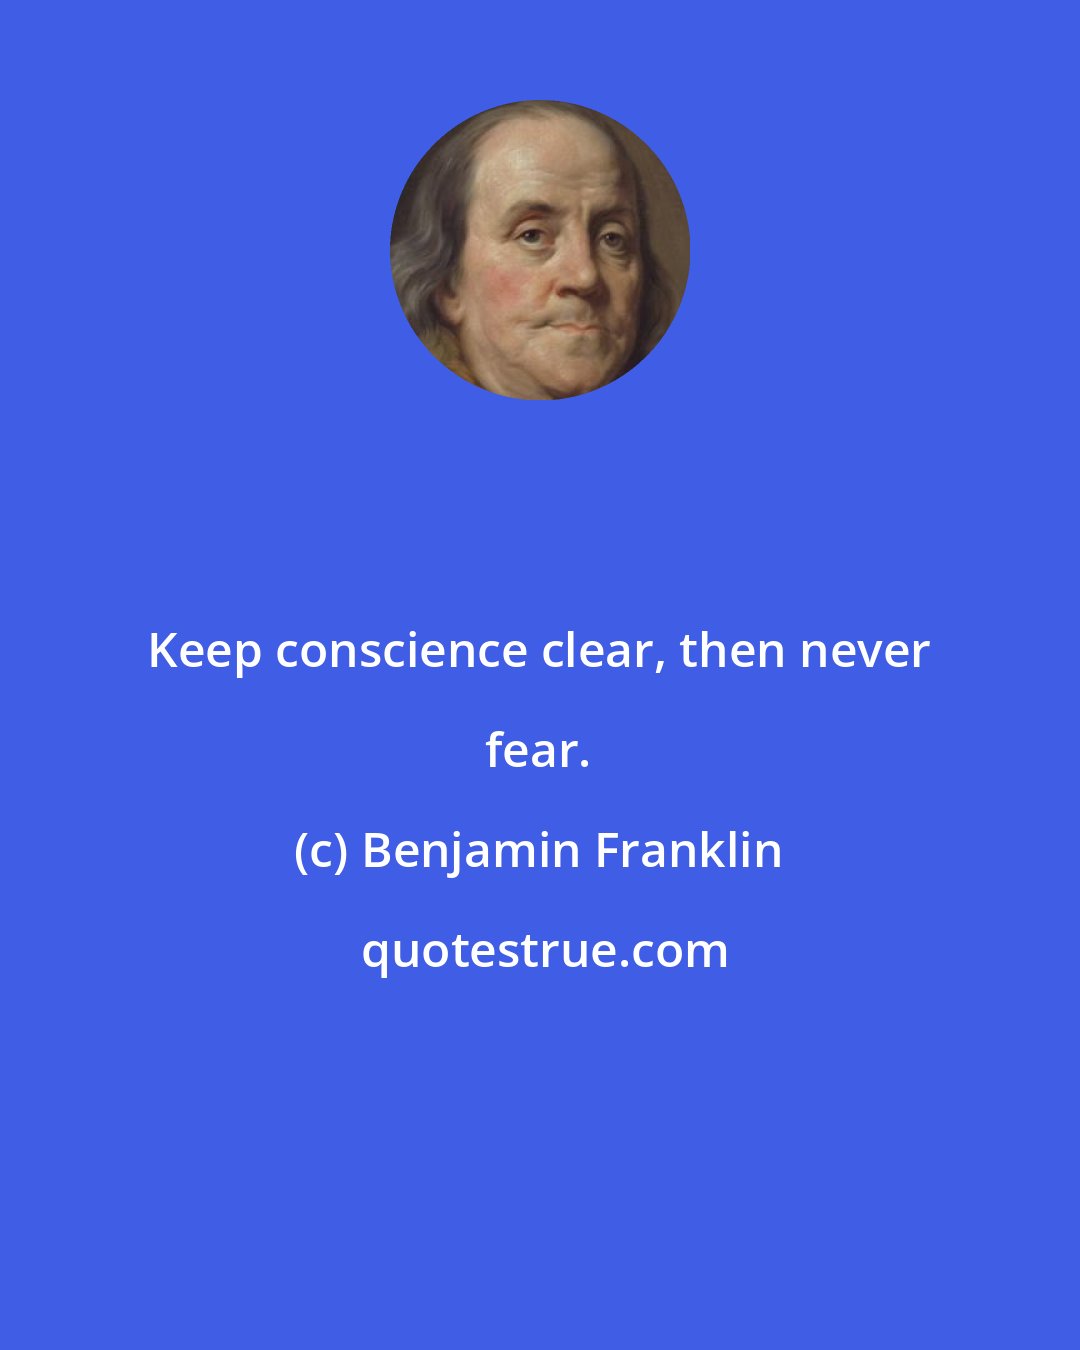 Benjamin Franklin: Keep conscience clear, then never fear.